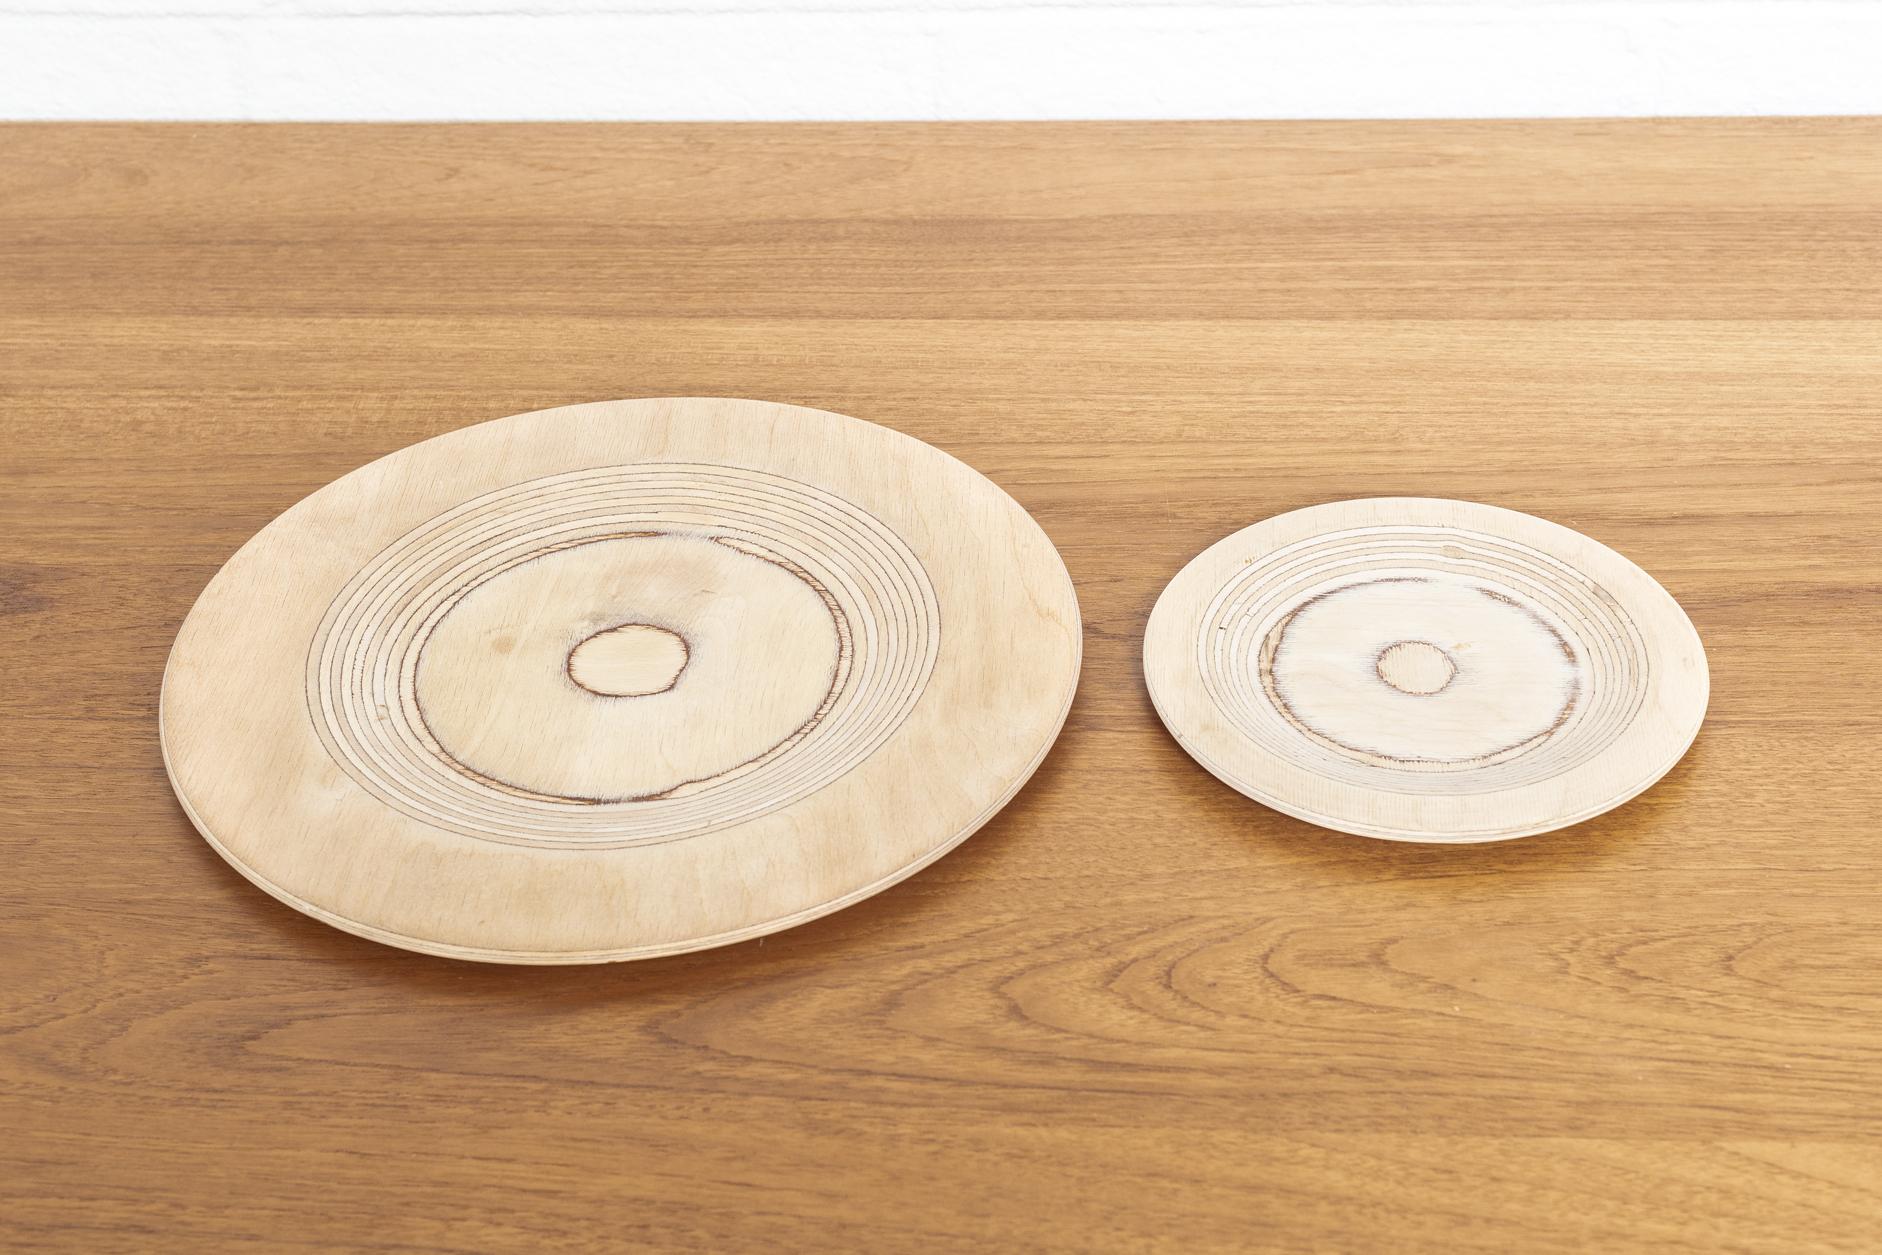 This striking pair of Mid-Century Modern wooden plates was designed by Saarinen and produced by Keuruu in Finland circa 1960. The clean, Minimalist design crafted from turned birch plywood features beautiful natural grain. The set includes 2